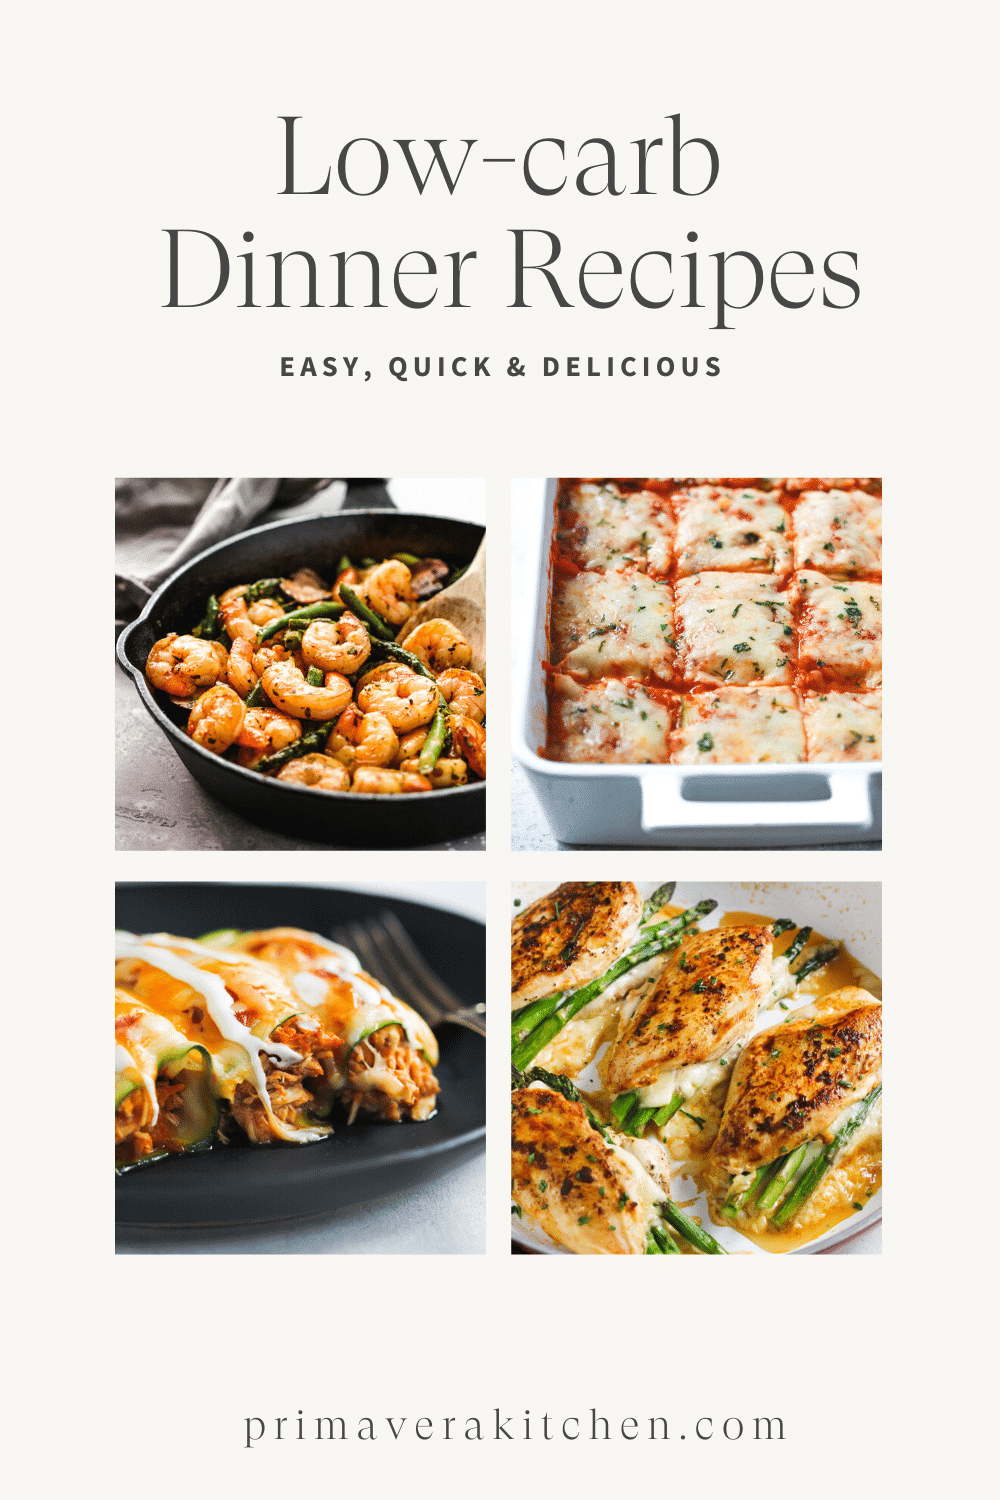 Titled Photo Collage (and shown): Low-carb Dinner Recipes.